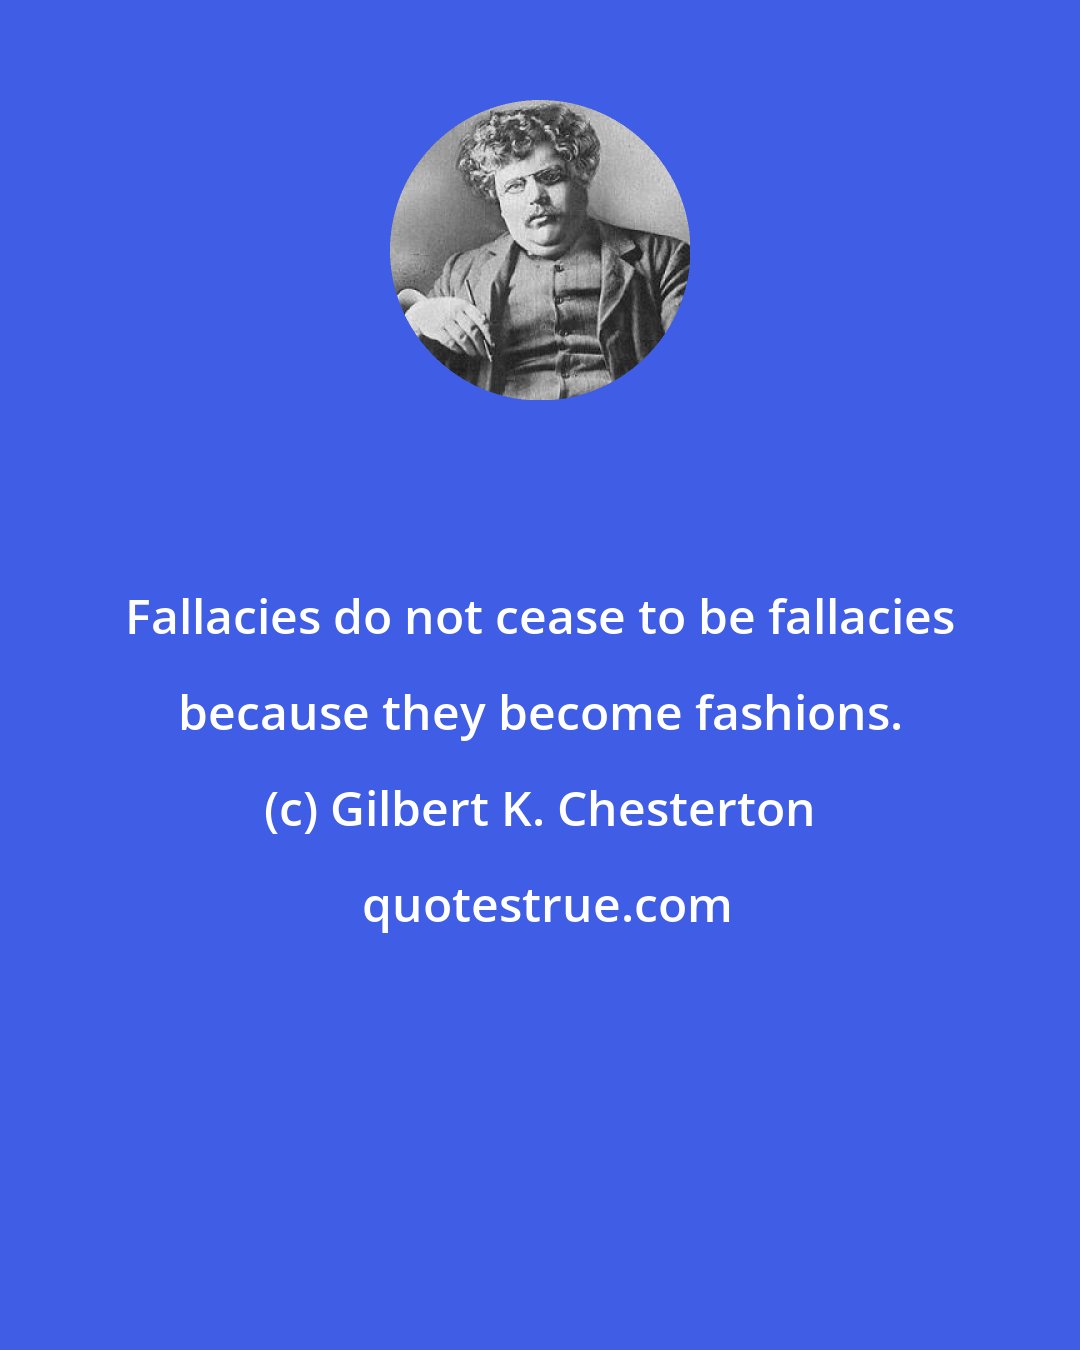 Gilbert K. Chesterton: Fallacies do not cease to be fallacies because they become fashions.